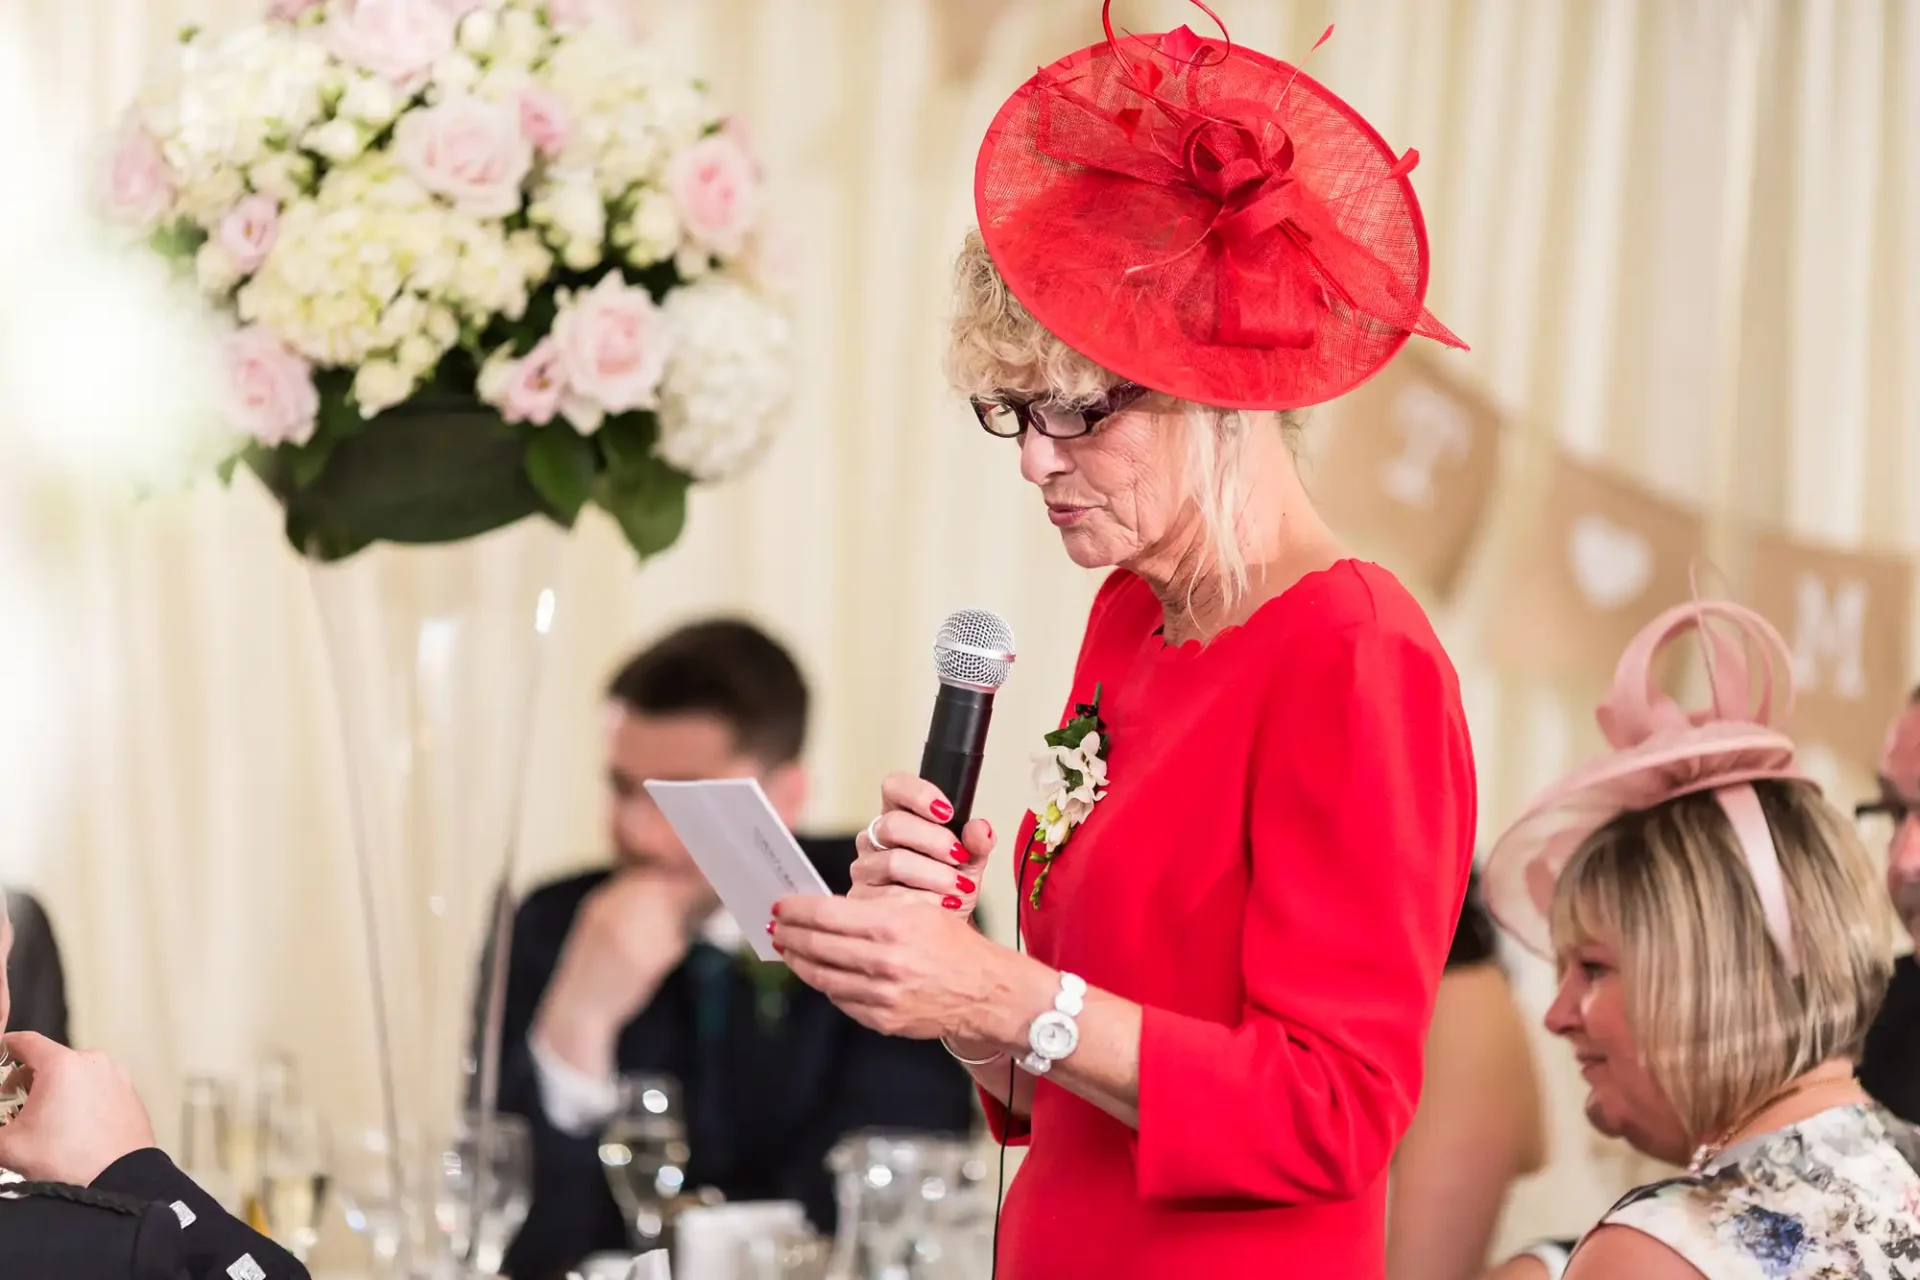 A woman in a red dress and hat speaks into a microphone while reading from a paper at a wedding reception.